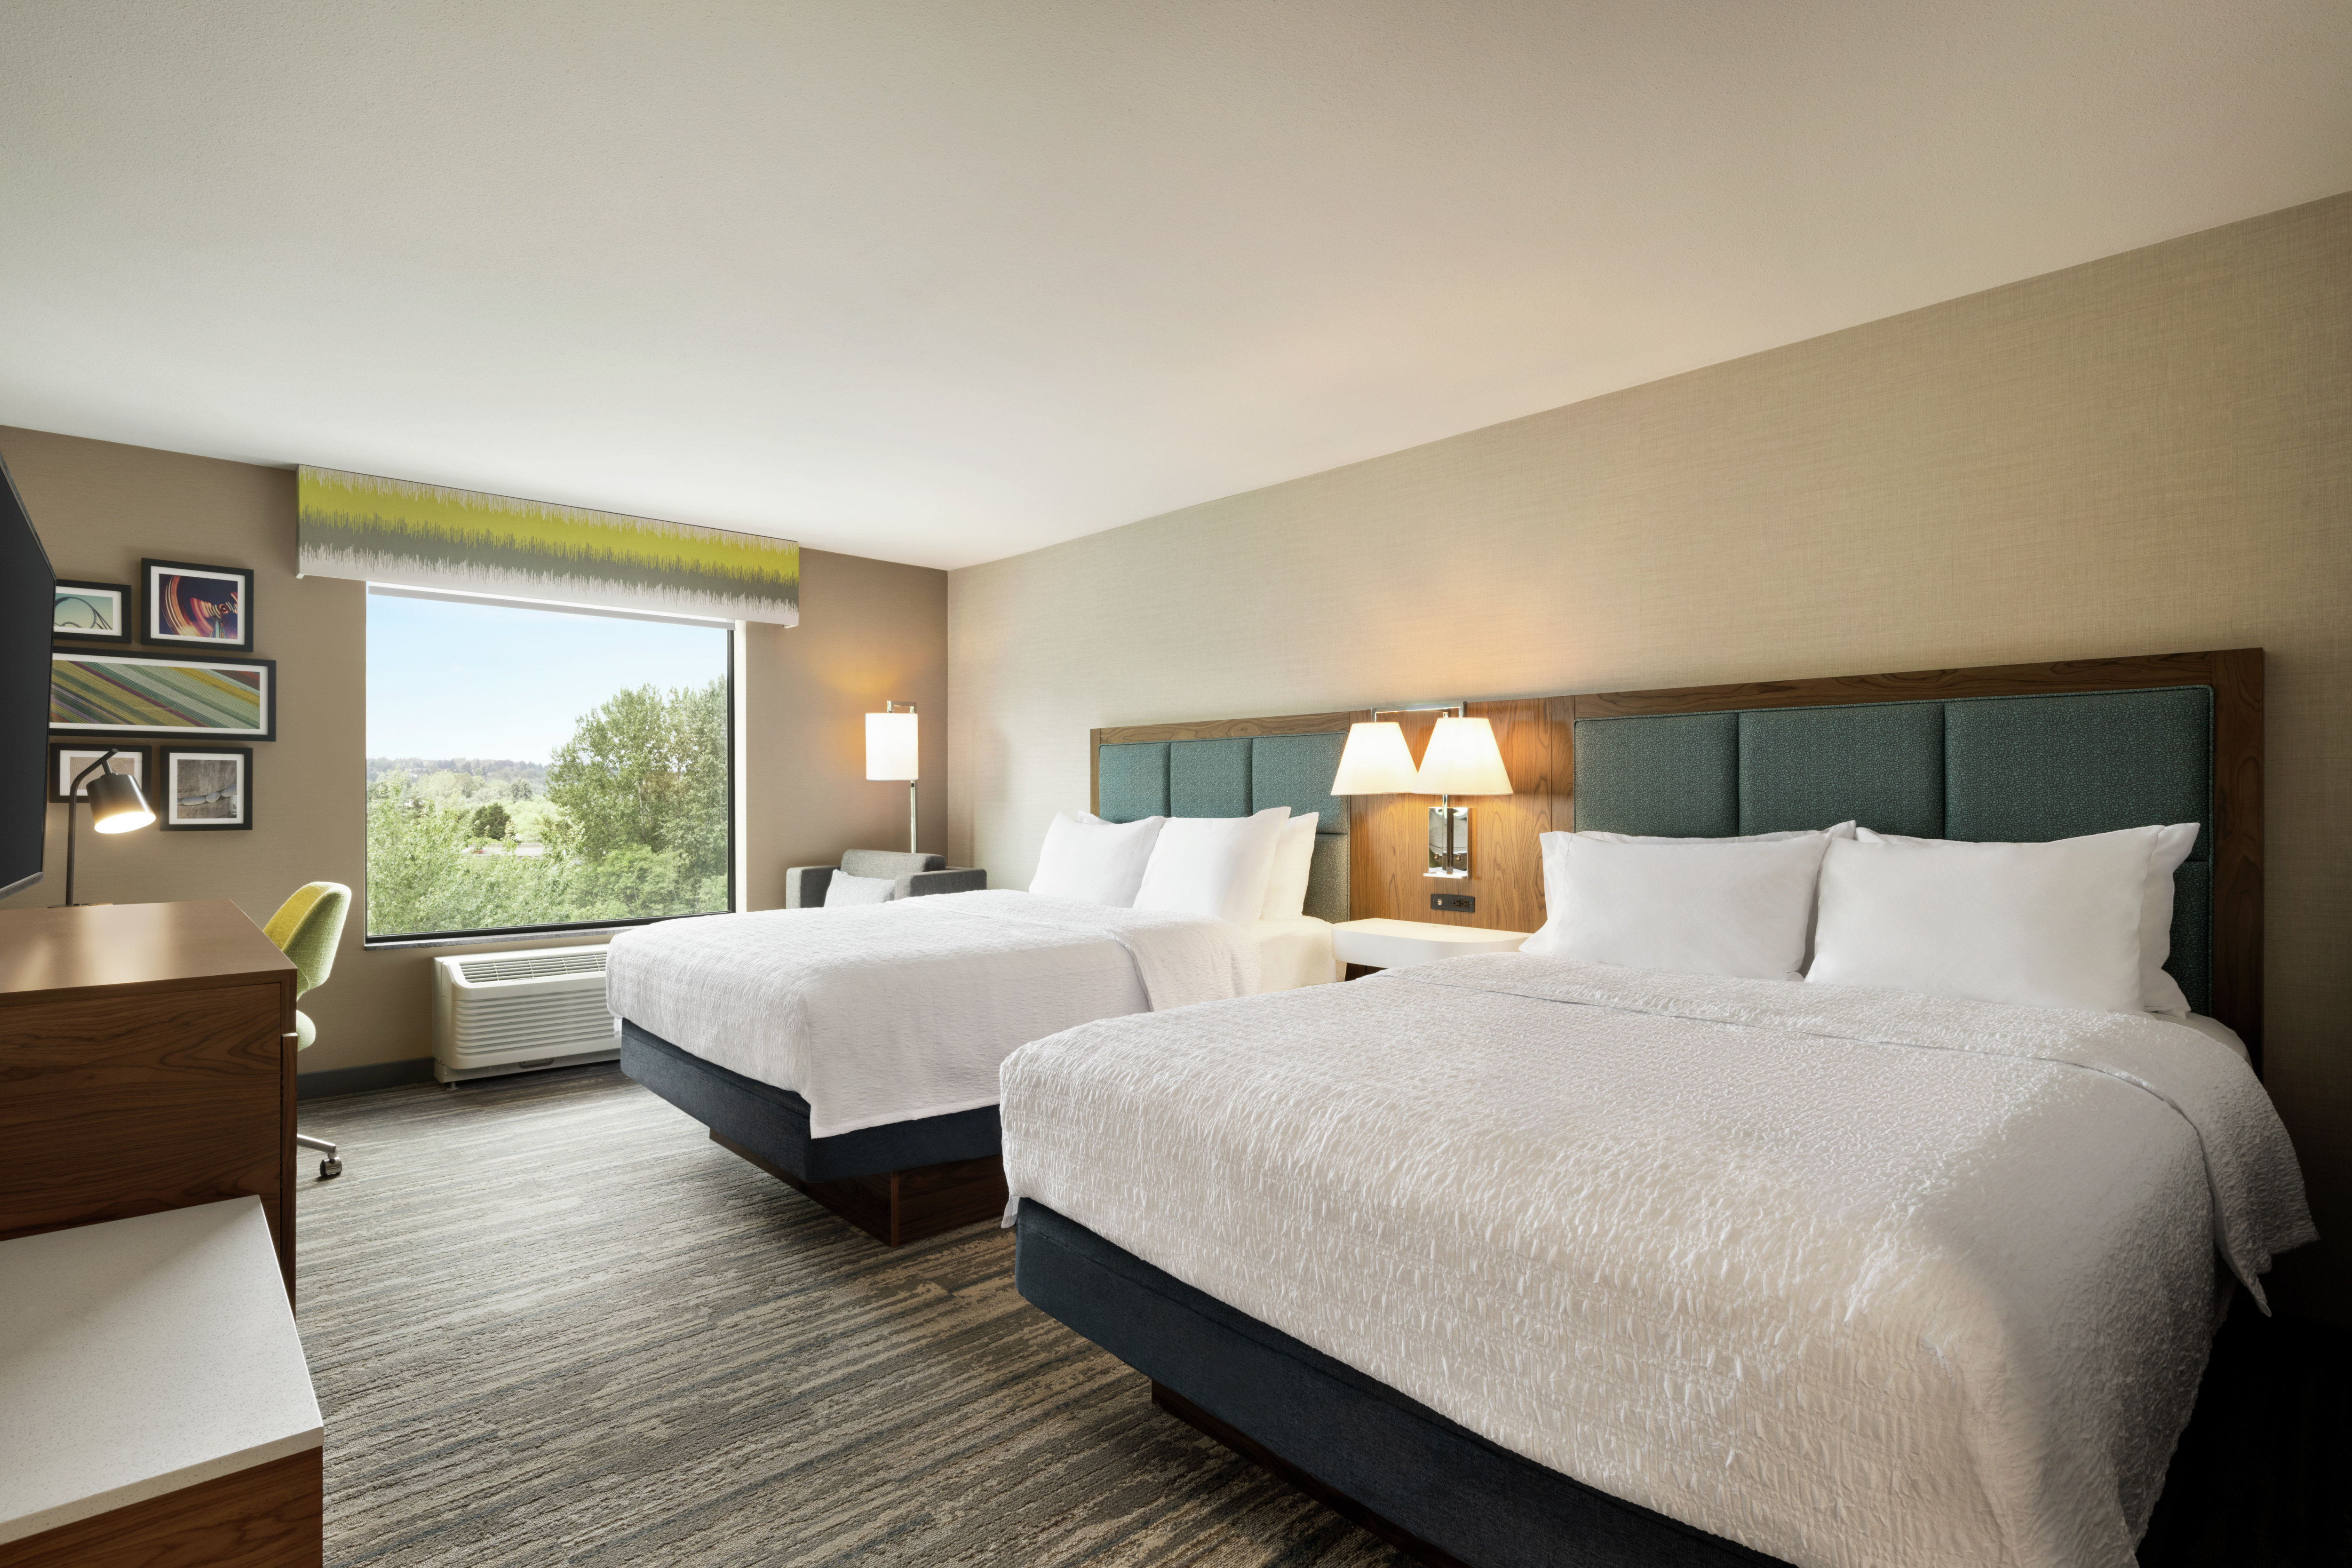 Spacious guest room featuring two comfortable queen beds, work desk, and stunning outside view.